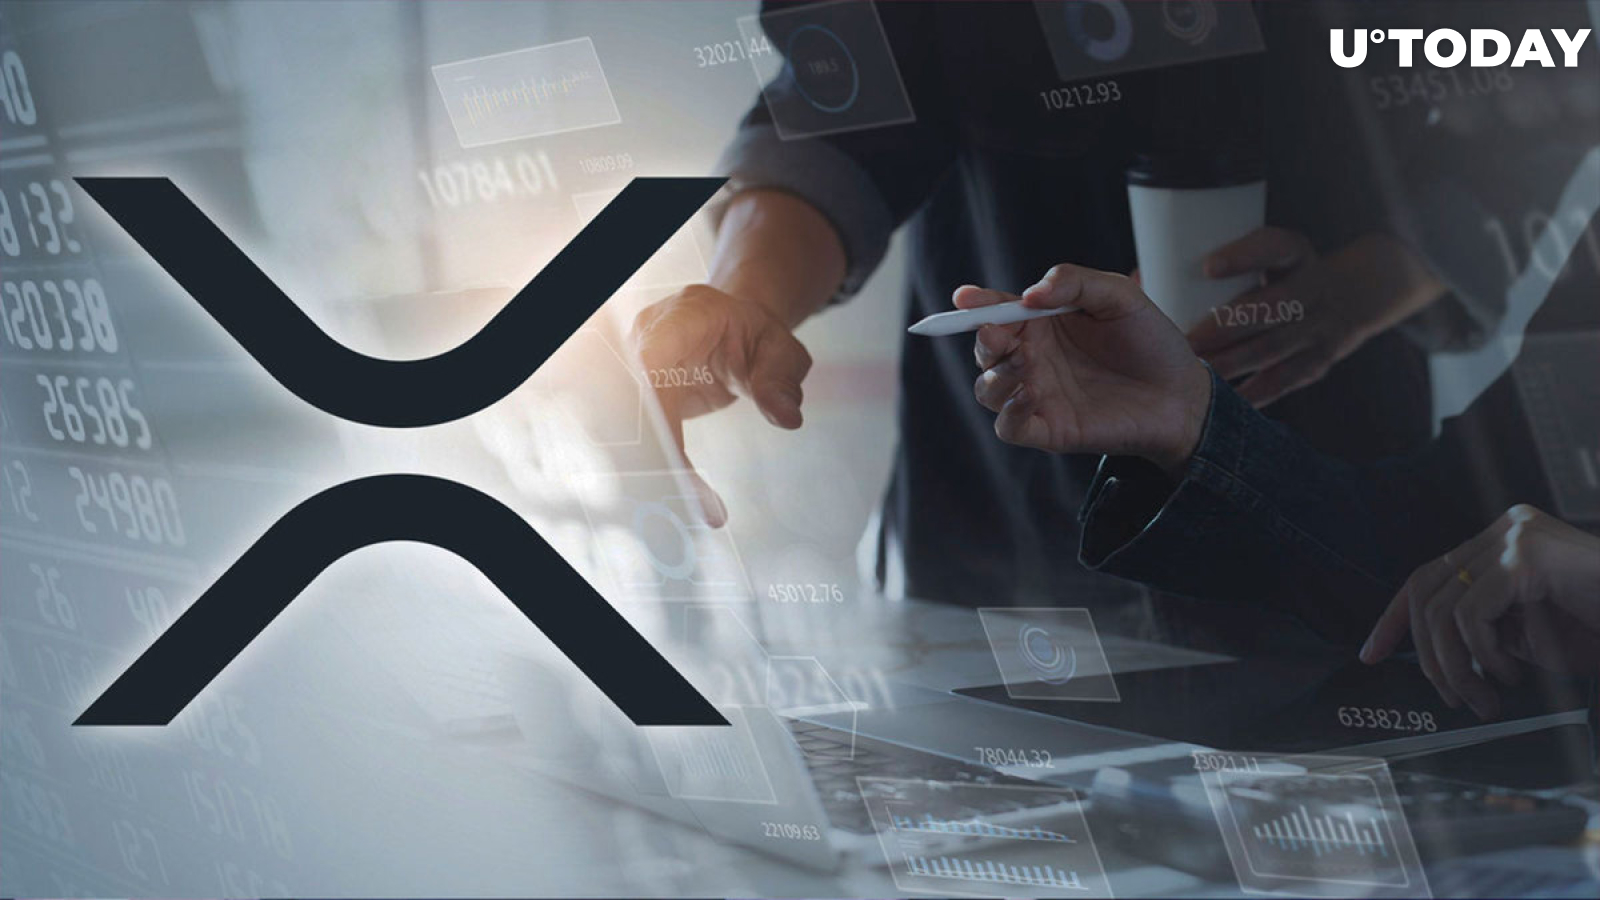 Millions of XRP on Move as Price Weighs Next Move